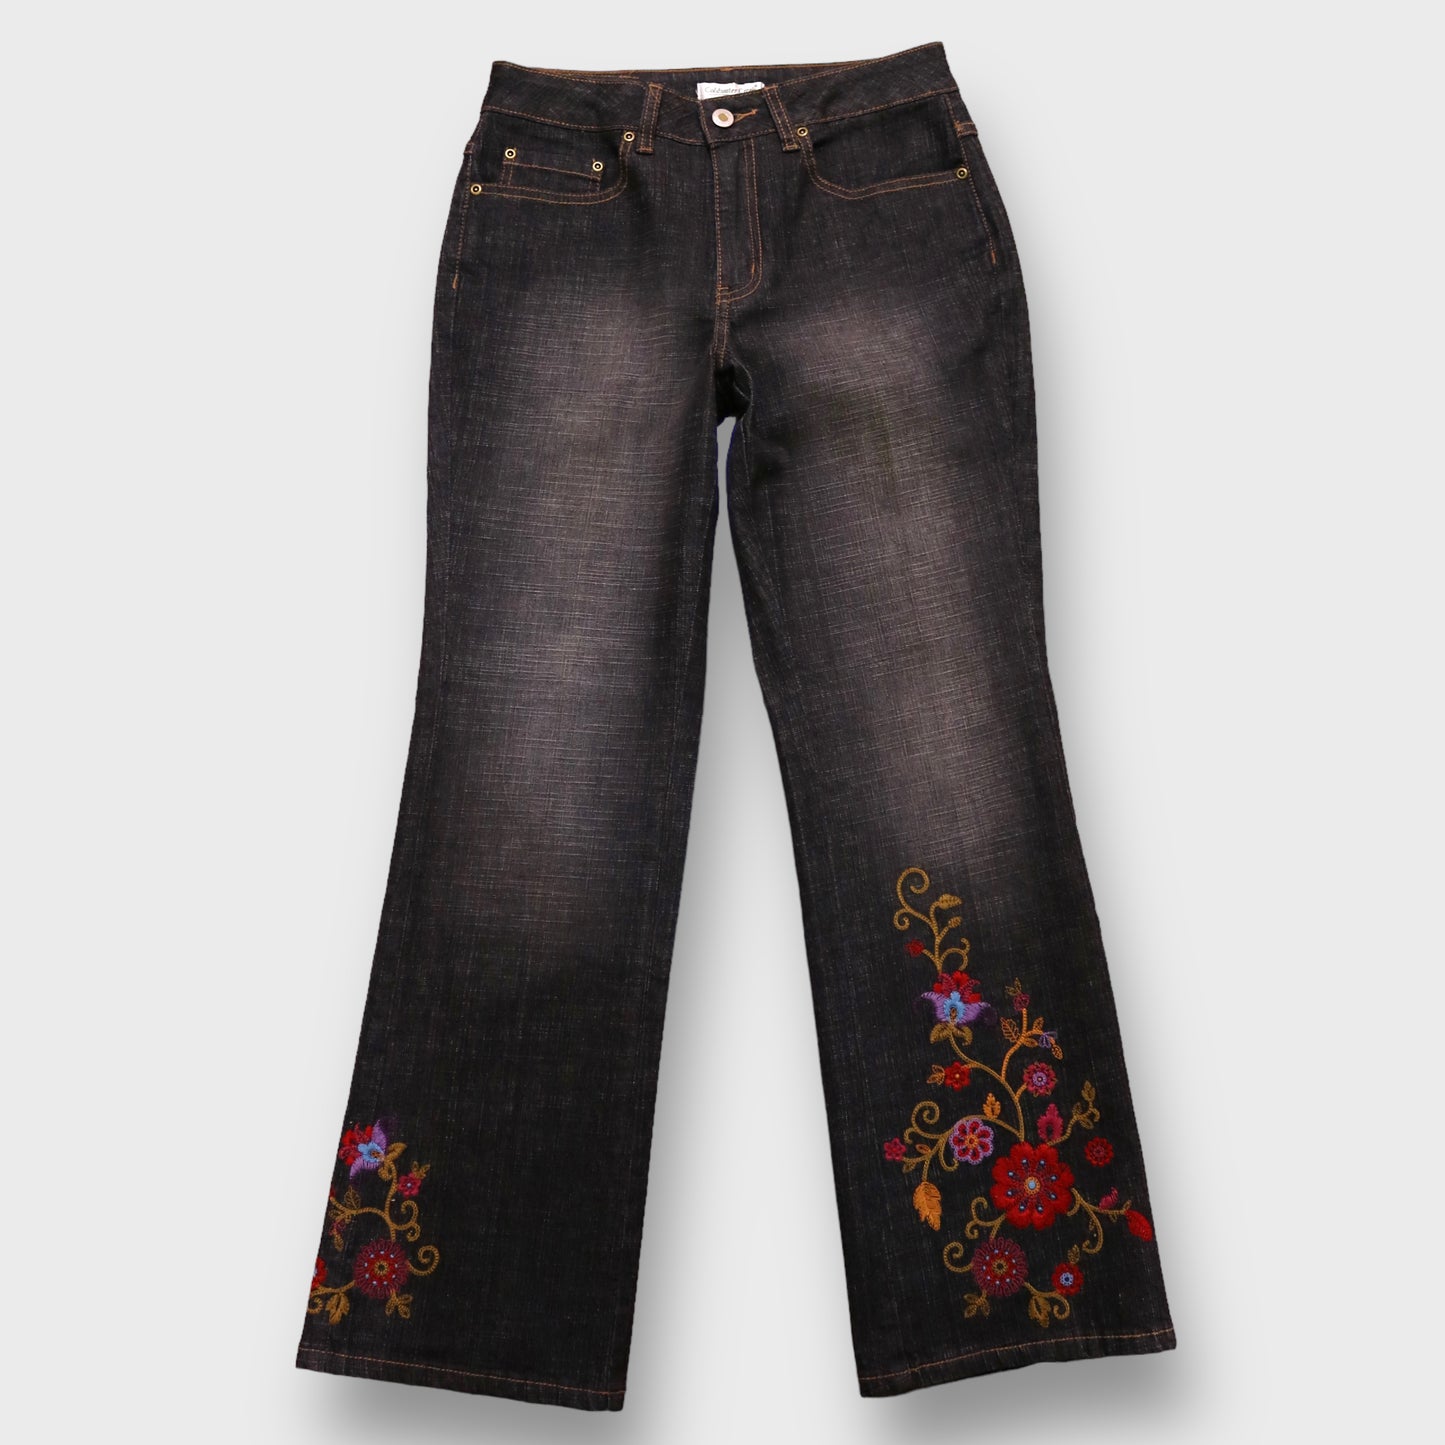 90's "Coldwater Creek" Flower embroidery black flare denim pants